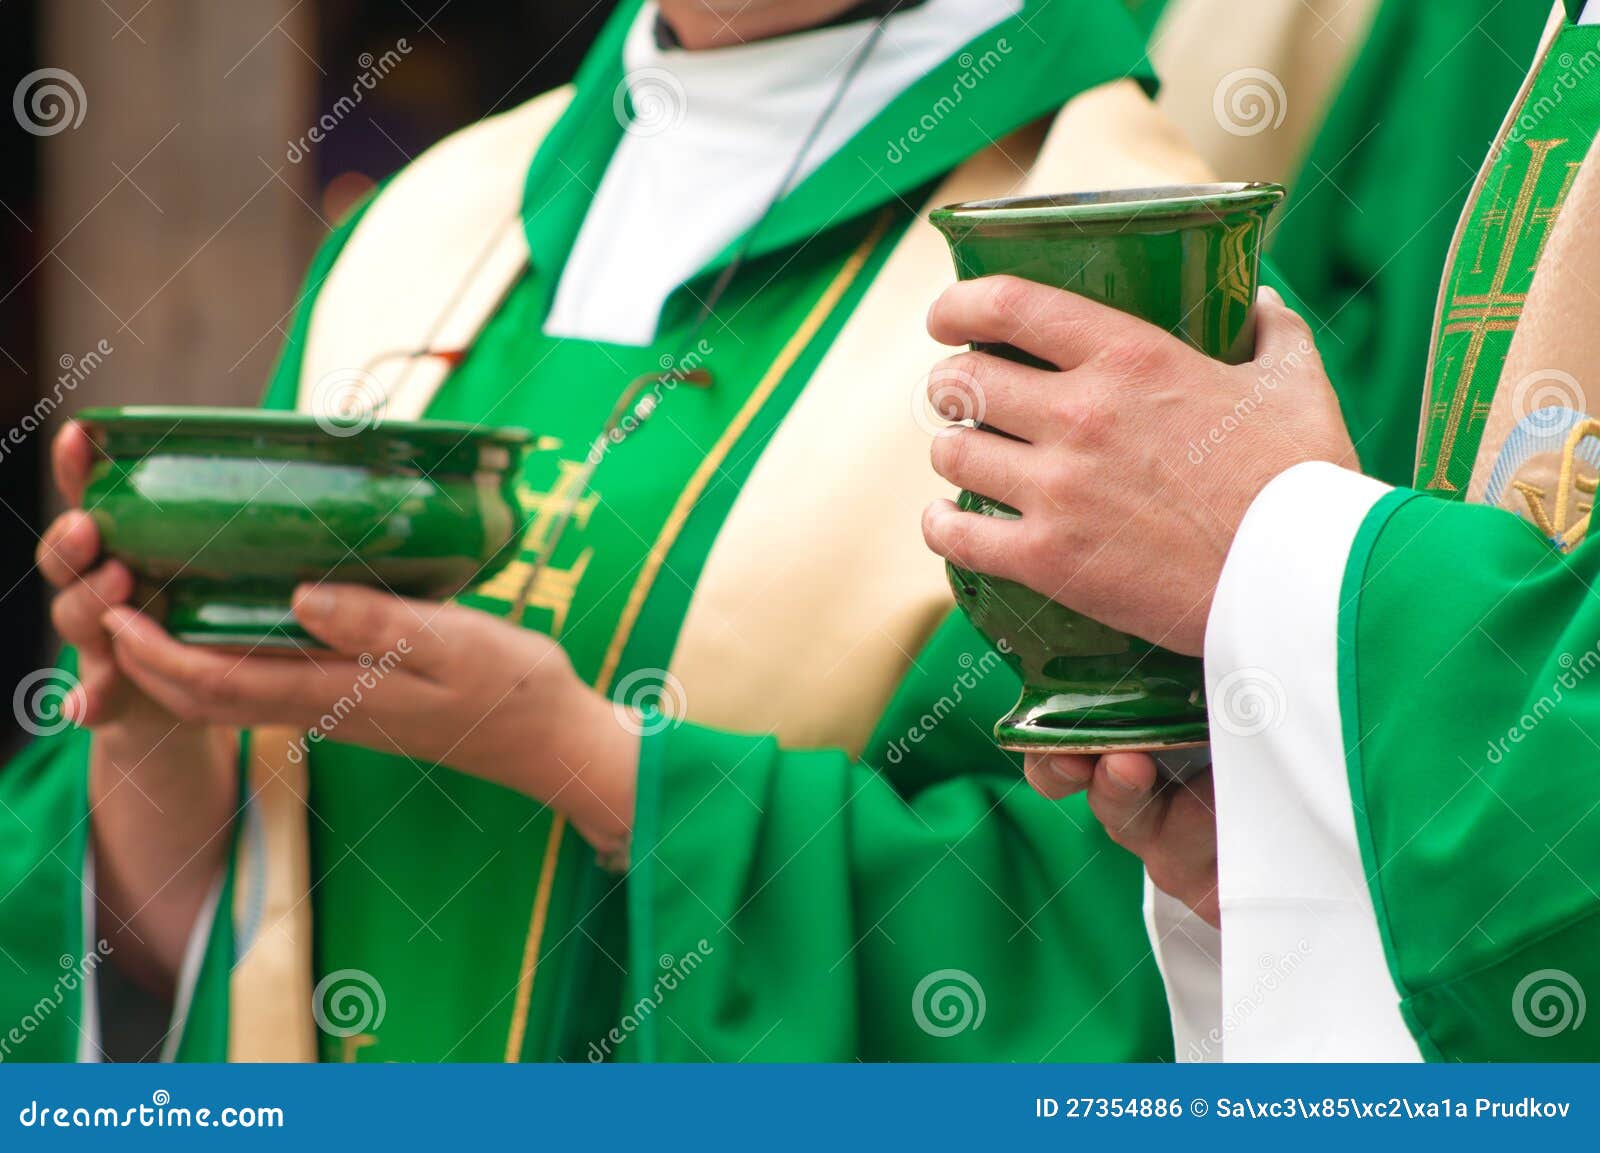 christian priests holding bowls of wafer and wine